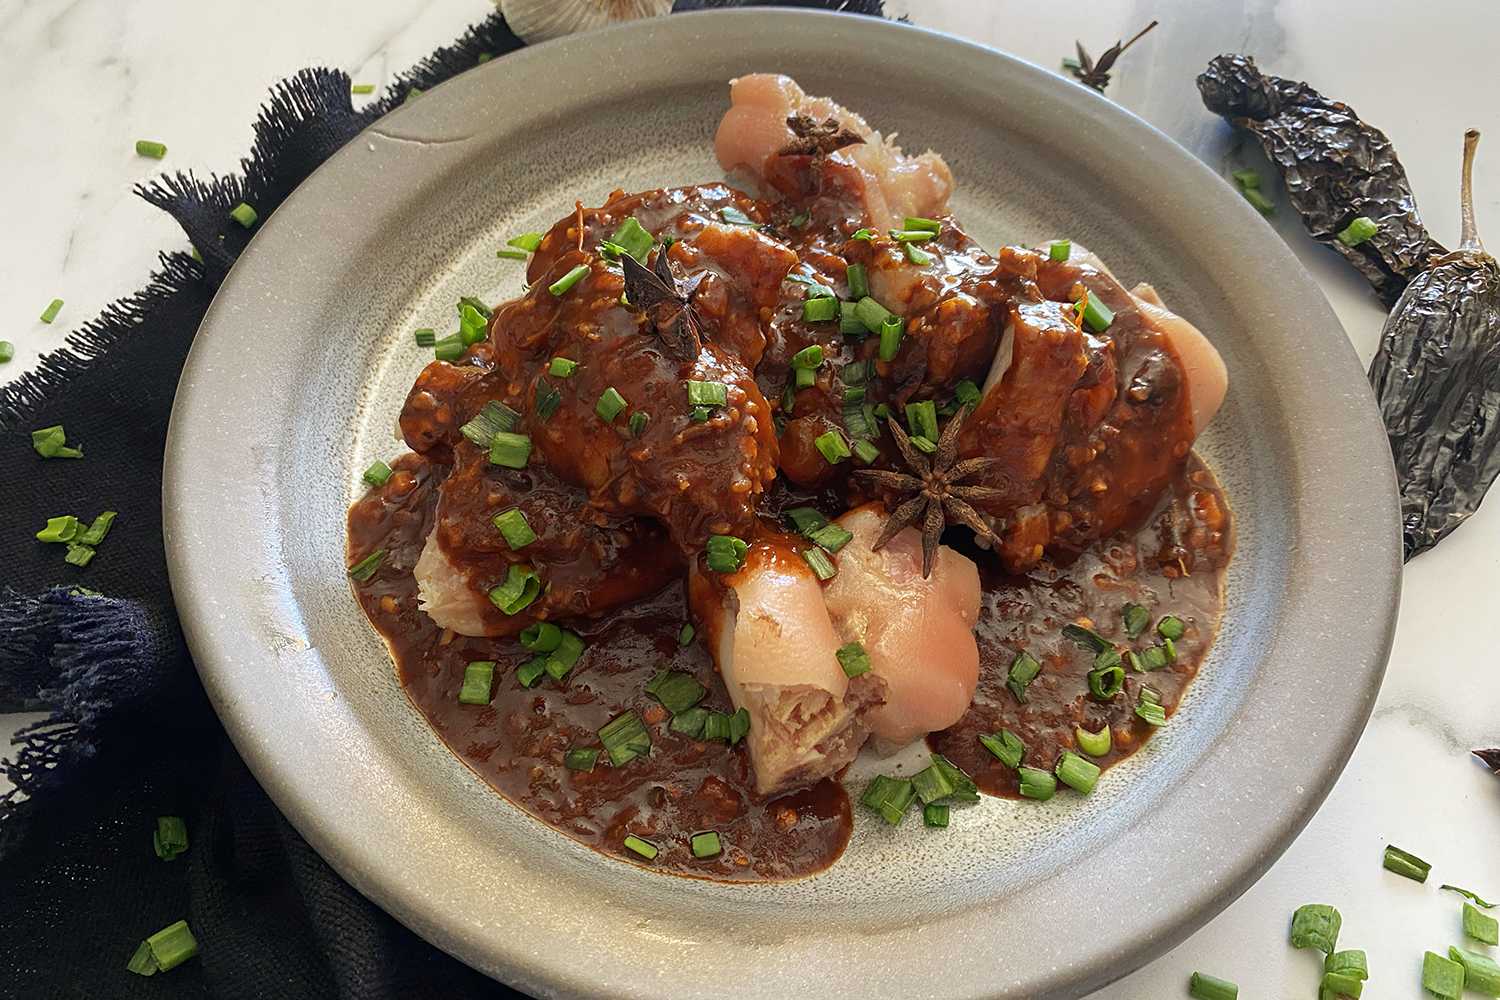 Cooked pork hocks with brown sauce and scallion sliced on top